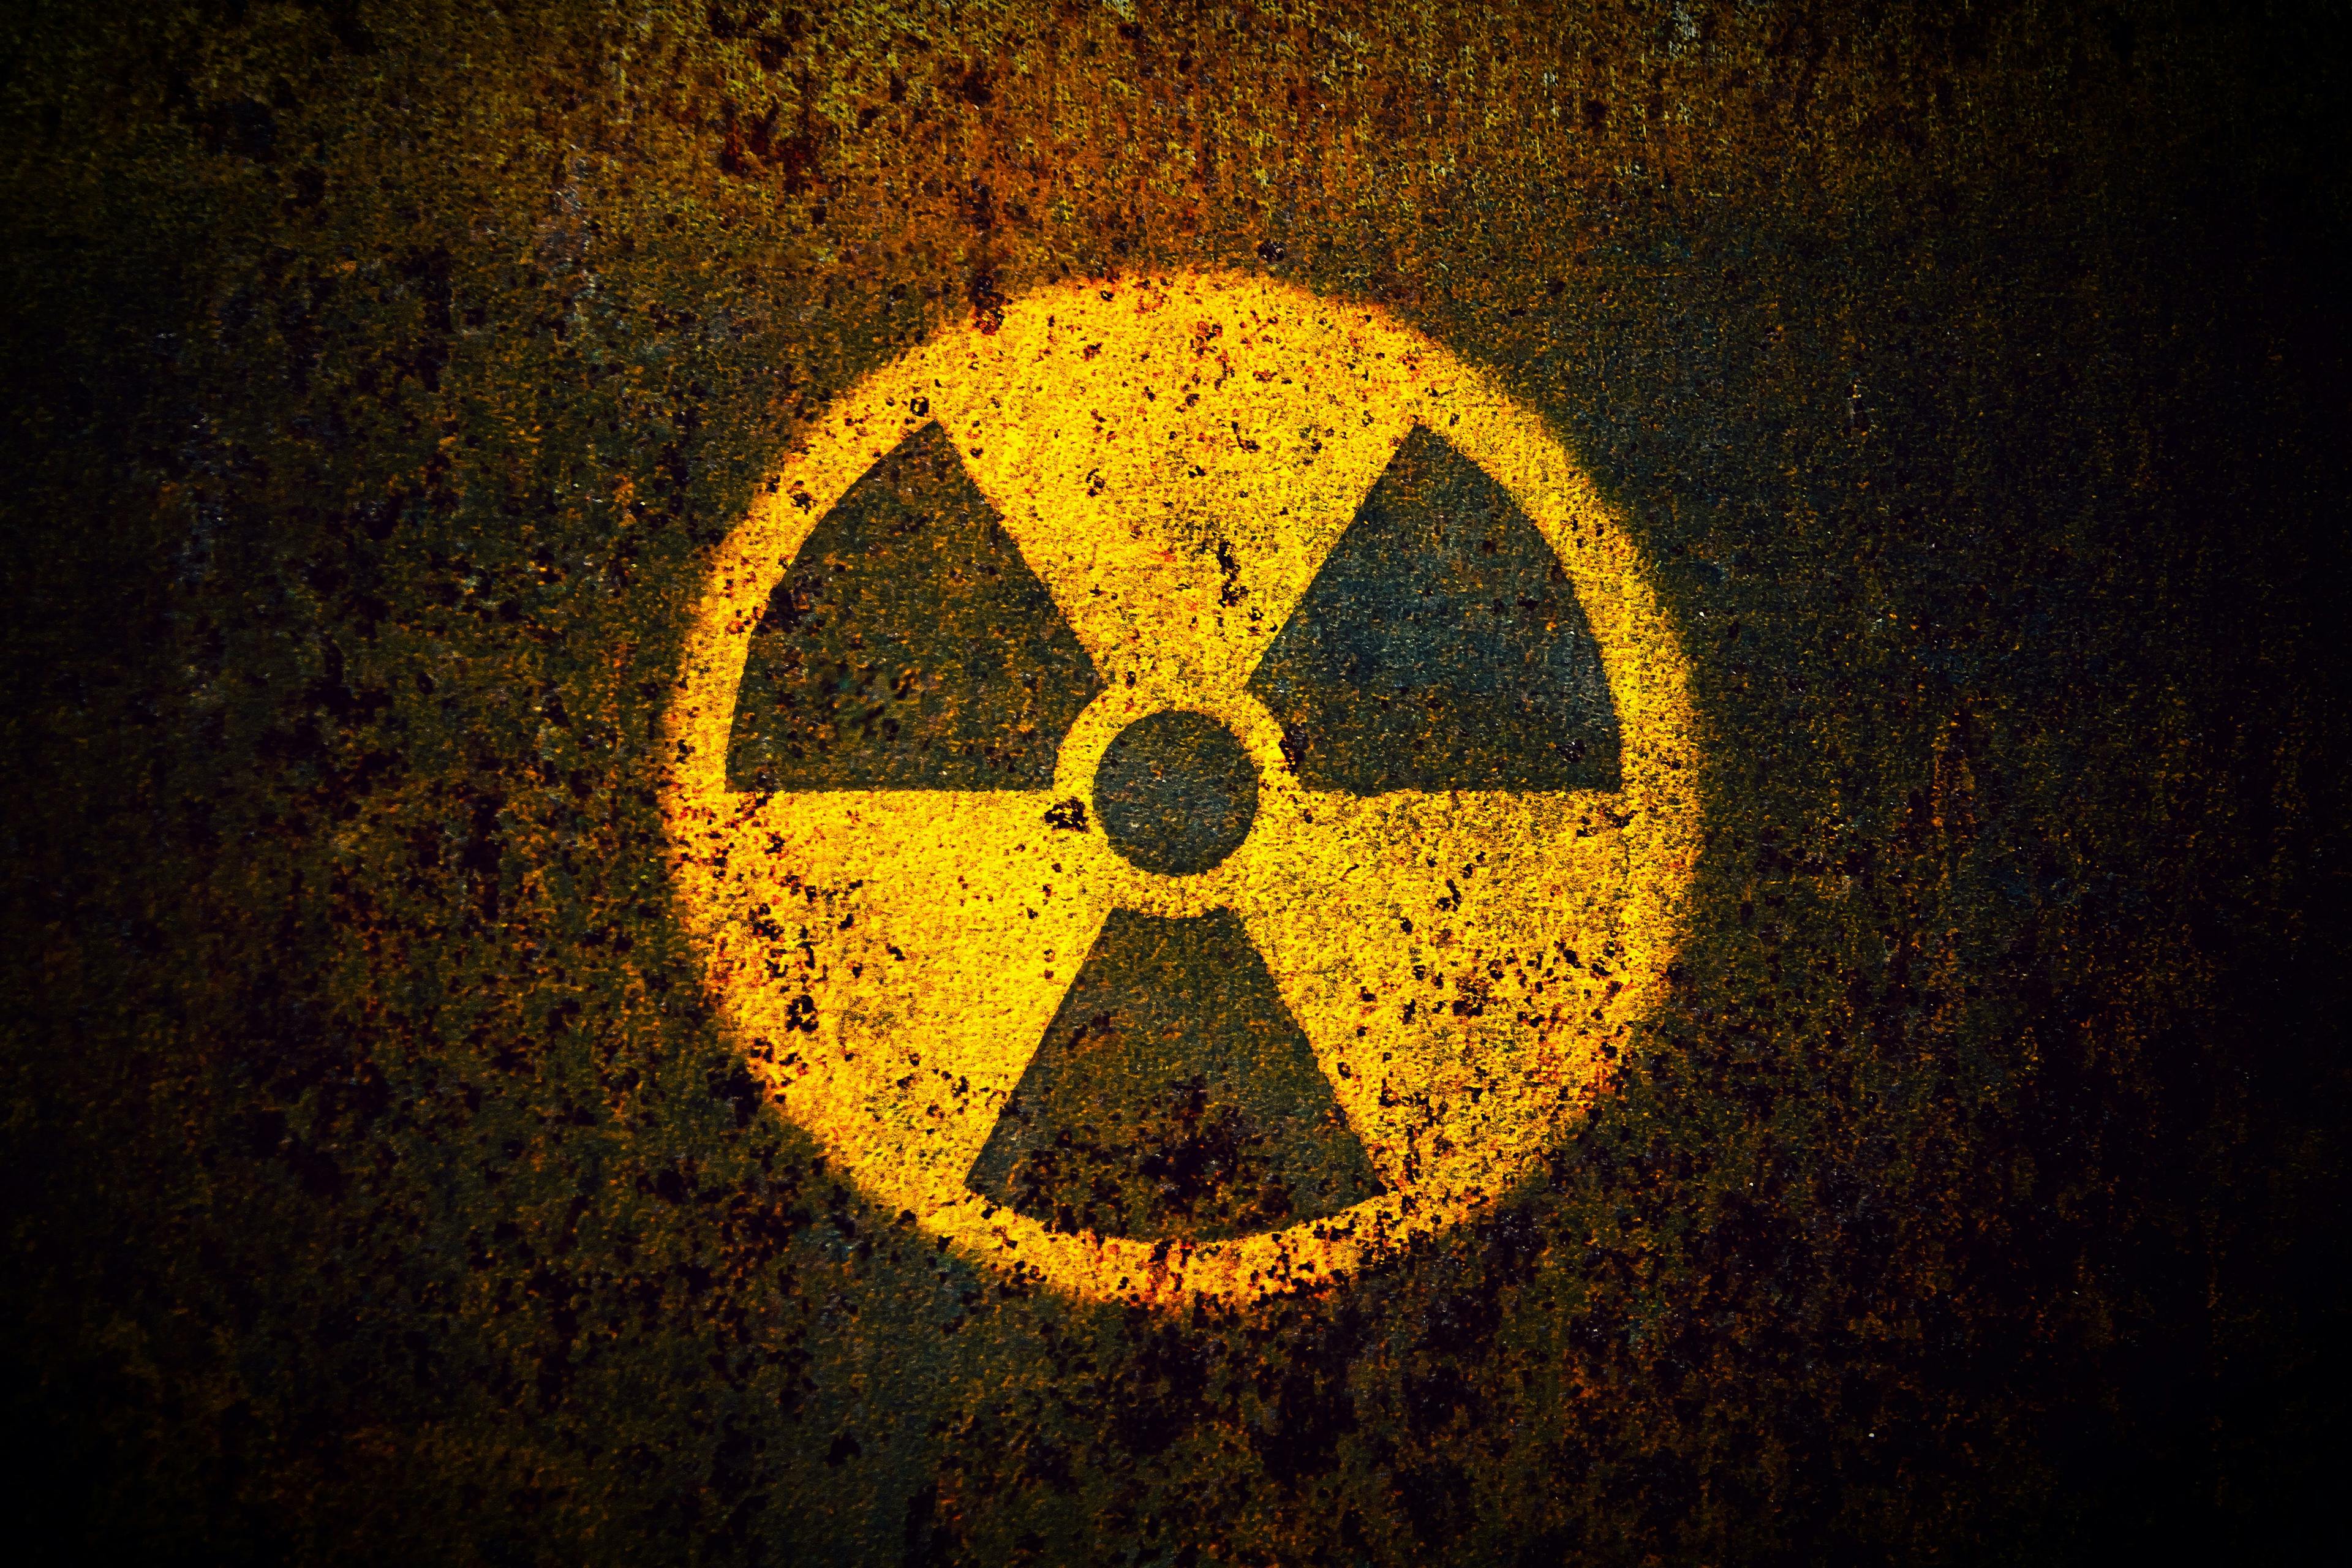 Round yellow radioactive (ionizing radiation) danger symbol painted on a massive rusty metal wall with dark rustic grungy texture background with vignetting. | Image Credit: © fewerton - stock.adobe.com